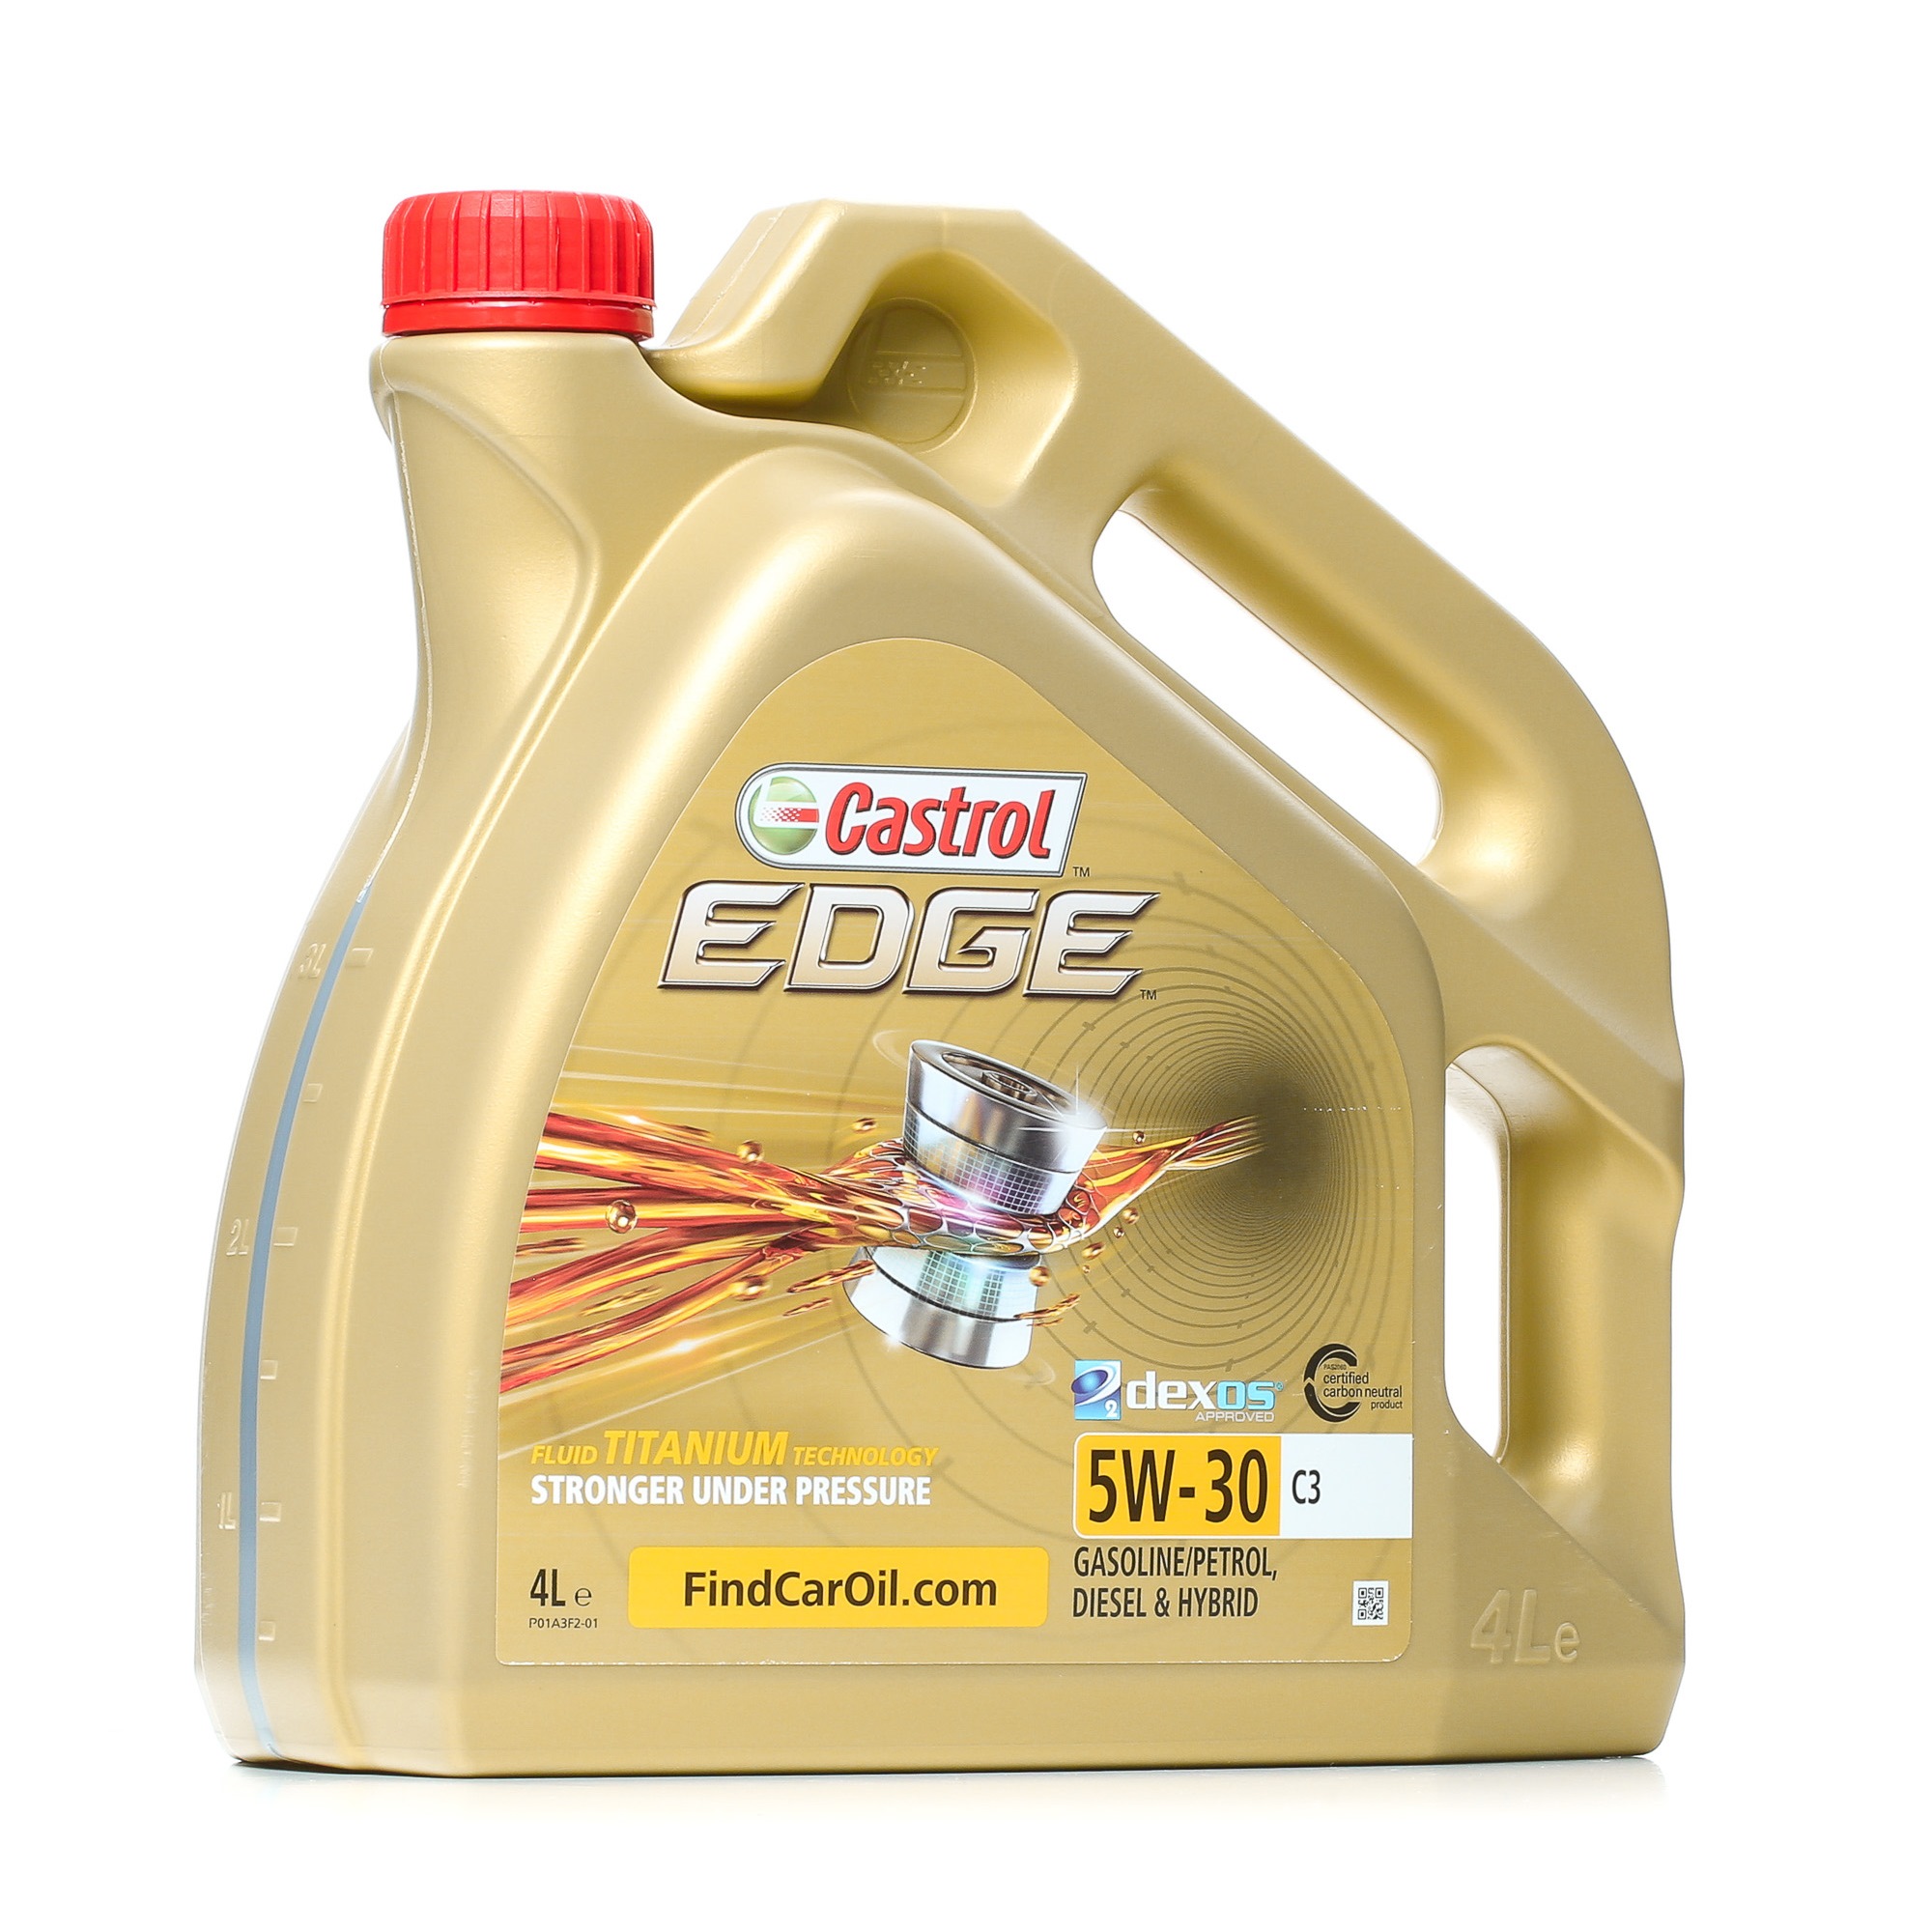 Vauxhall Engine oil CASTROL 5W-30 at a good price